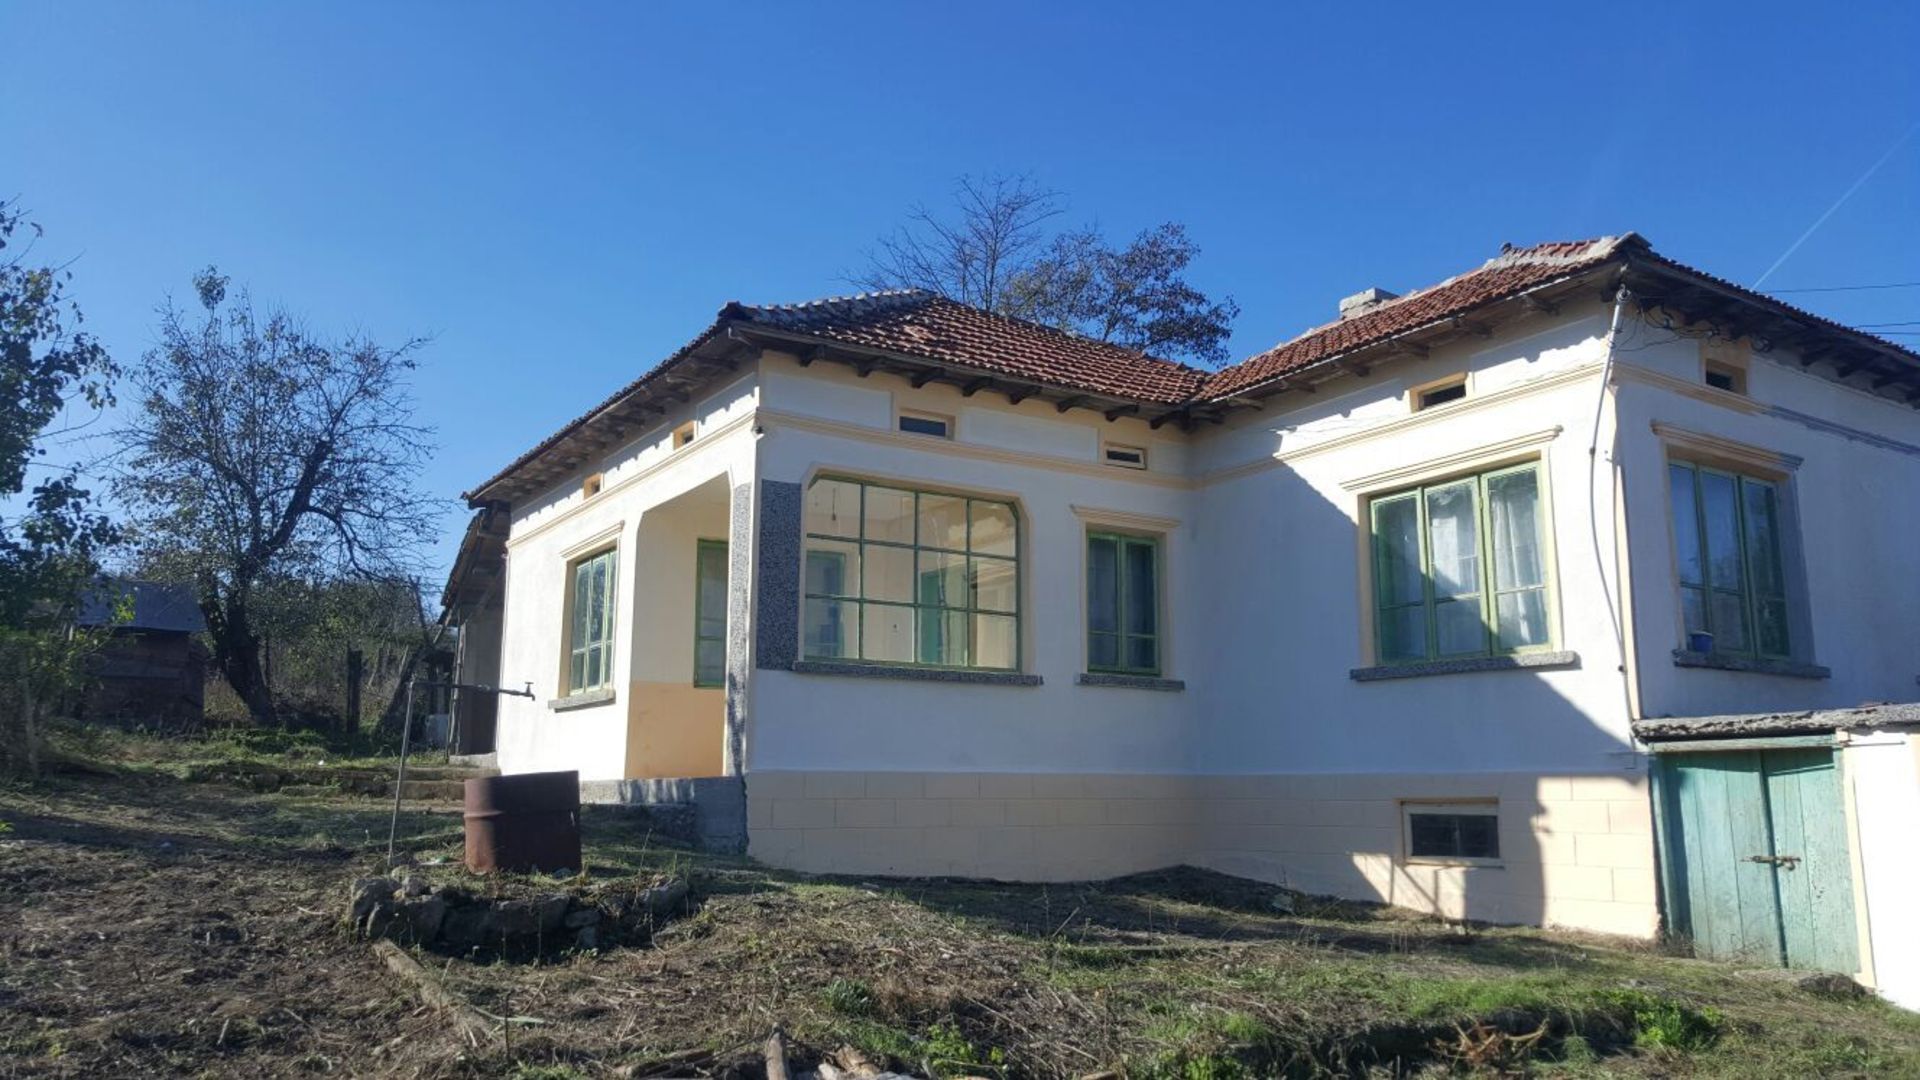 3 BED COTTAGE NR COAST WITH 1/2 ACRE GARDEN, KRASEN, BULGARIA - Image 4 of 19